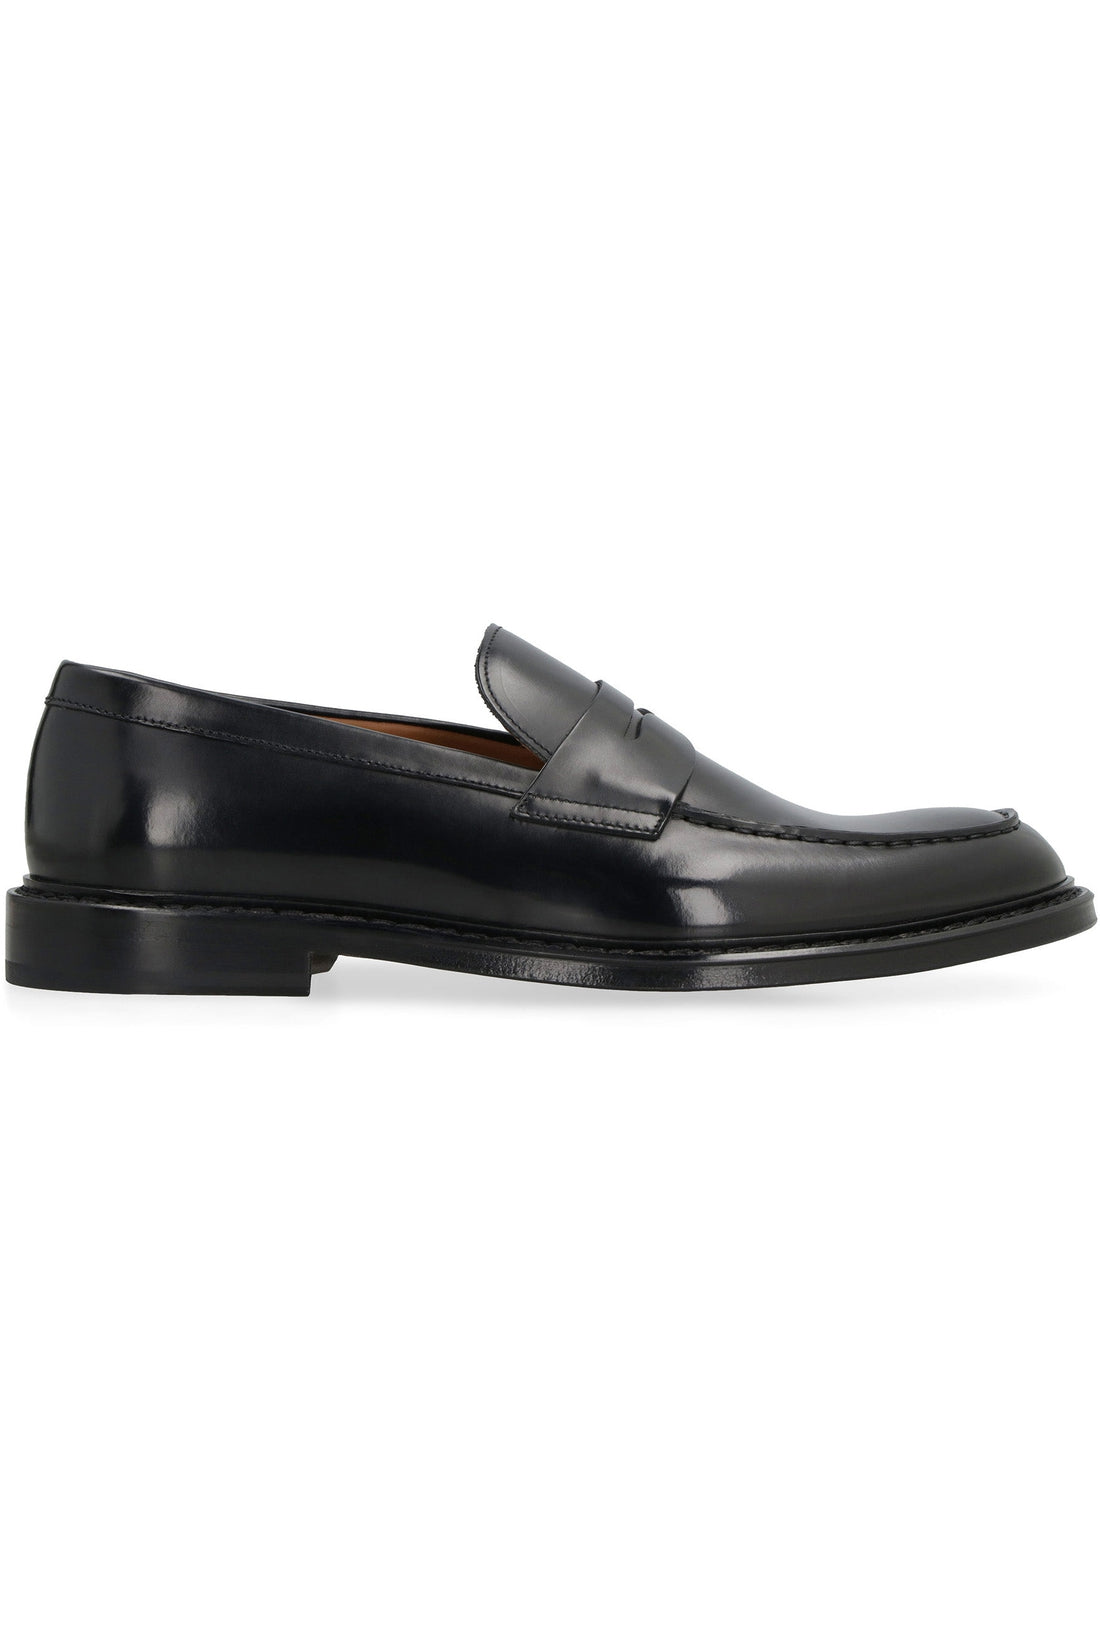 Doucal's-OUTLET-SALE-Brushed leather loafers-ARCHIVIST